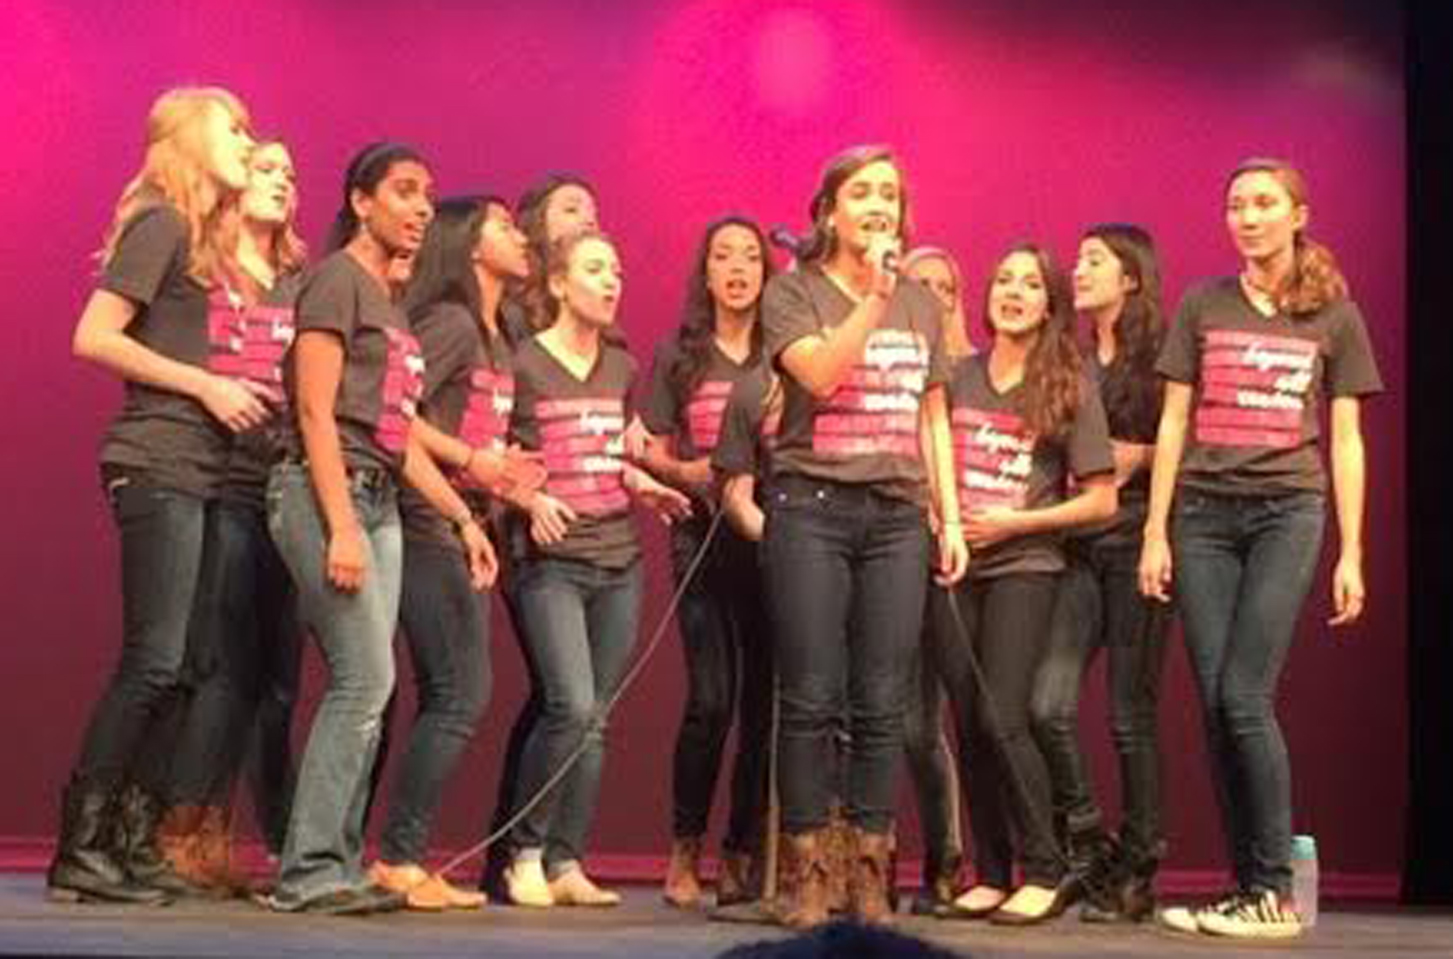 Beyond All Reason, SLU’s all-female a cappella group, performs at the showcase hosted by Billikens After Dark last Friday evening in the Xavier auditorium. Courtesy of Rachel Moylan.